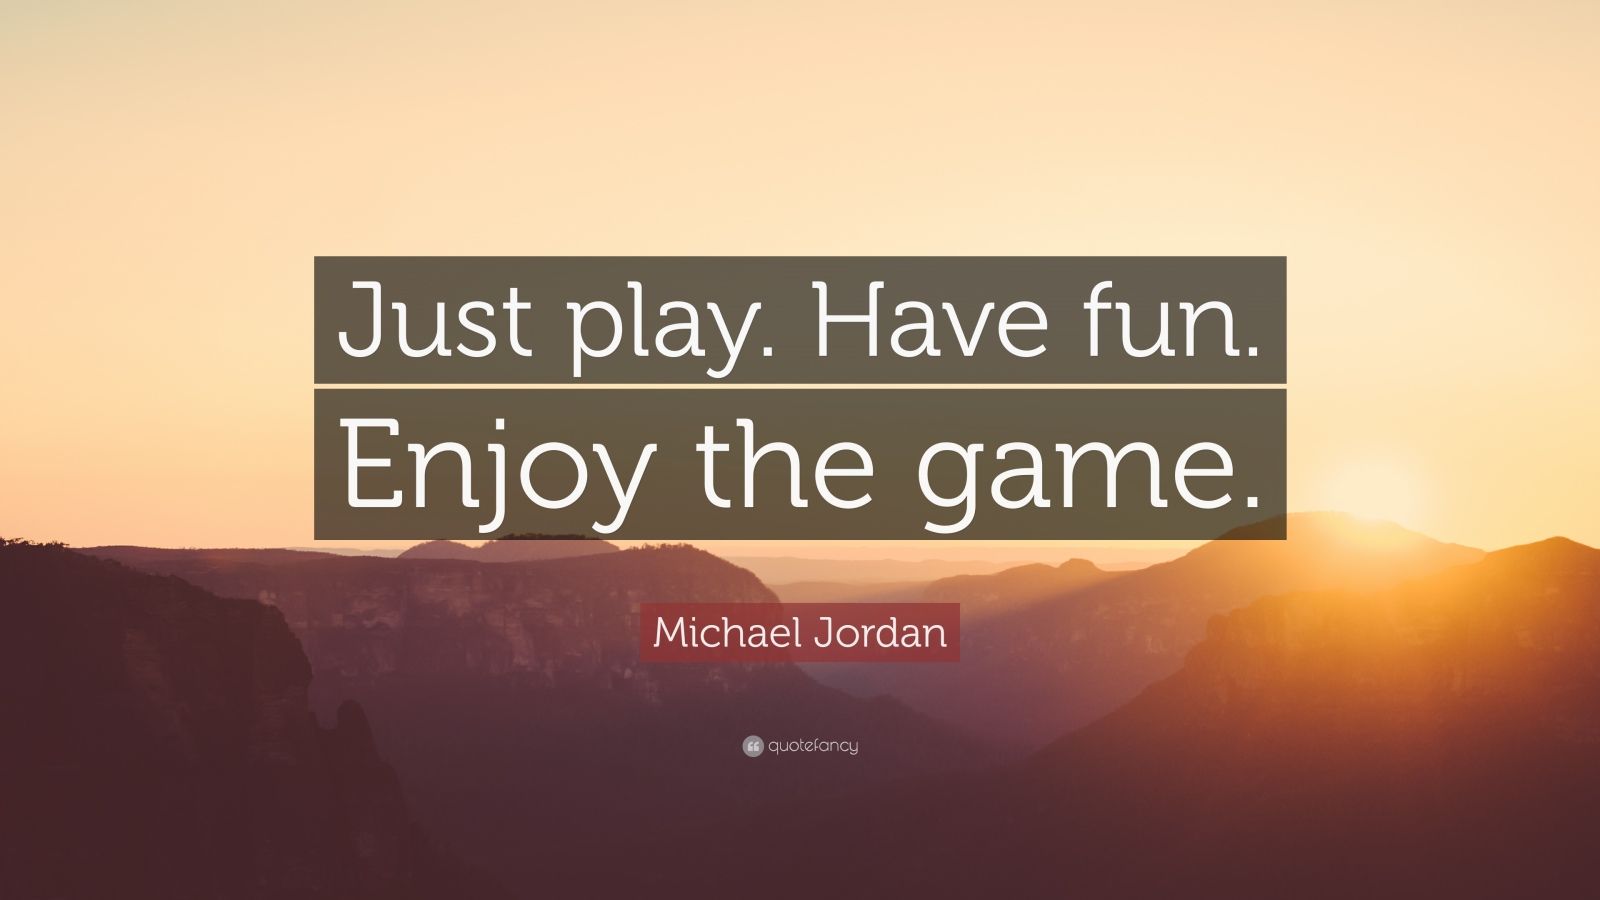 Michael Jordan Quote: “Just play. Have fun. Enjoy the game.” (12